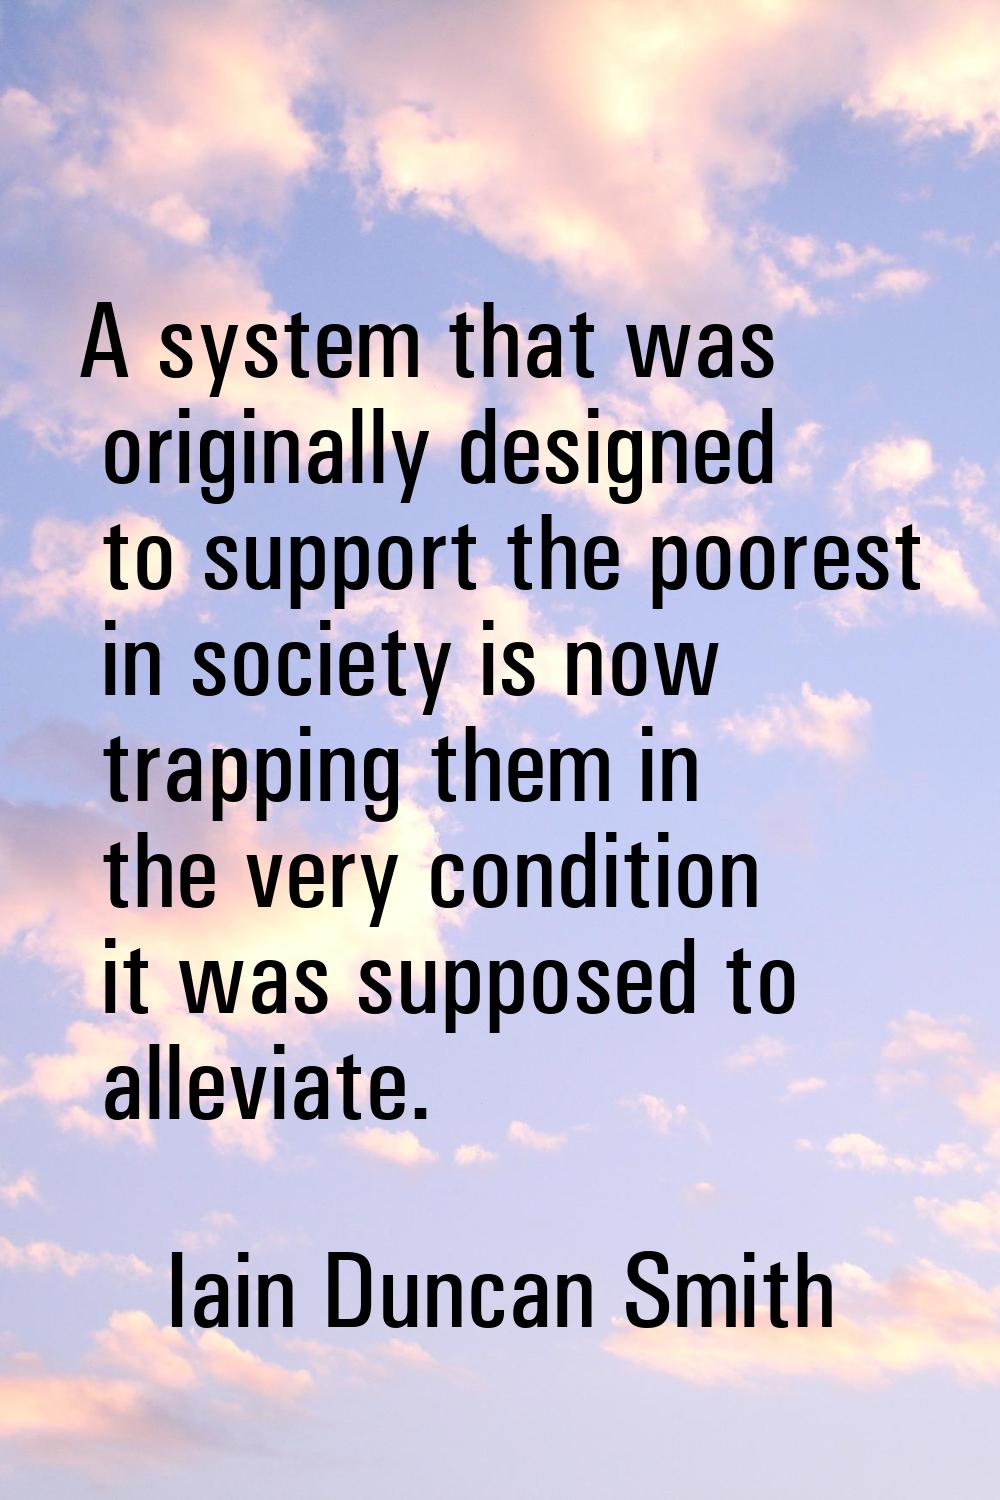 A system that was originally designed to support the poorest in society is now trapping them in the